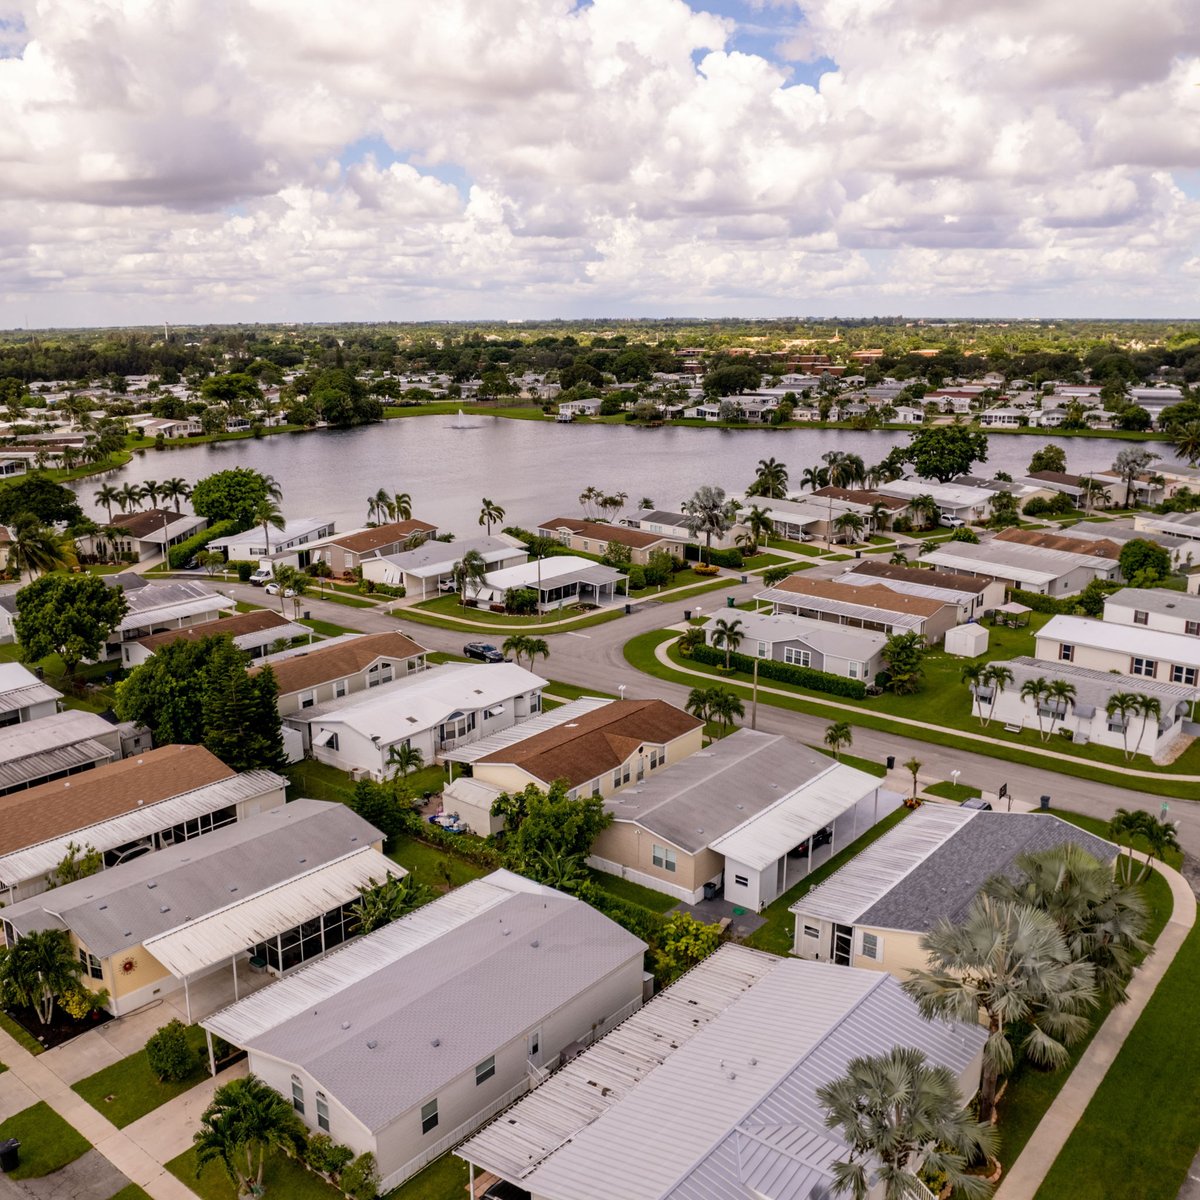 #Florida #manufacturedhomes offer #qualityconstruction, modern amenities, and a level of #customization that perfectly match your lifestyle and budget. Learn why the members of the #FMHA are here to help you find your #perfecthome: buff.ly/3ICtPAM

#manufacturedhousing